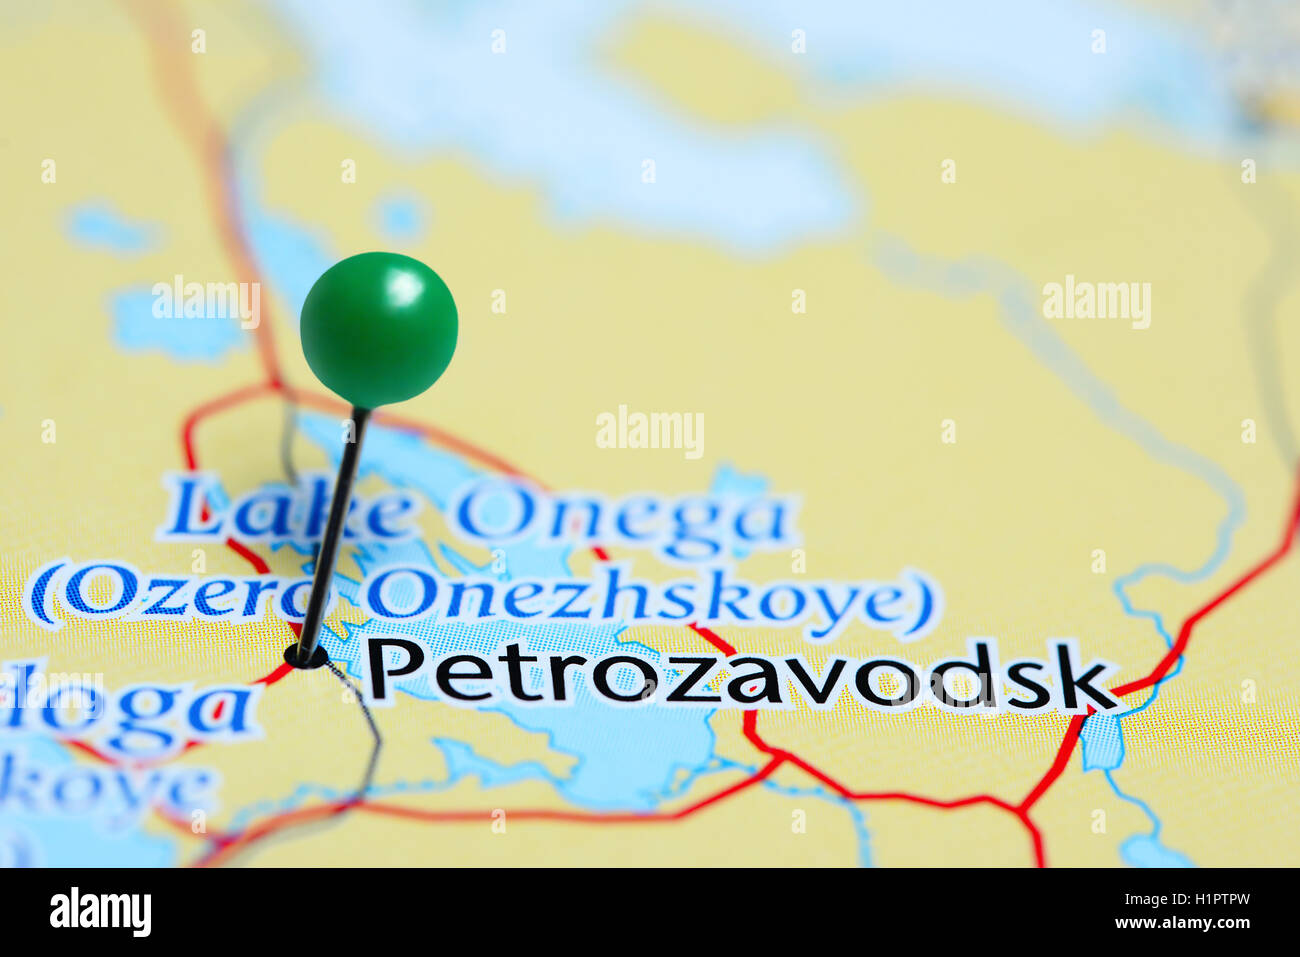 Petrozavodsk pinned on a map of Russia Stock Photo